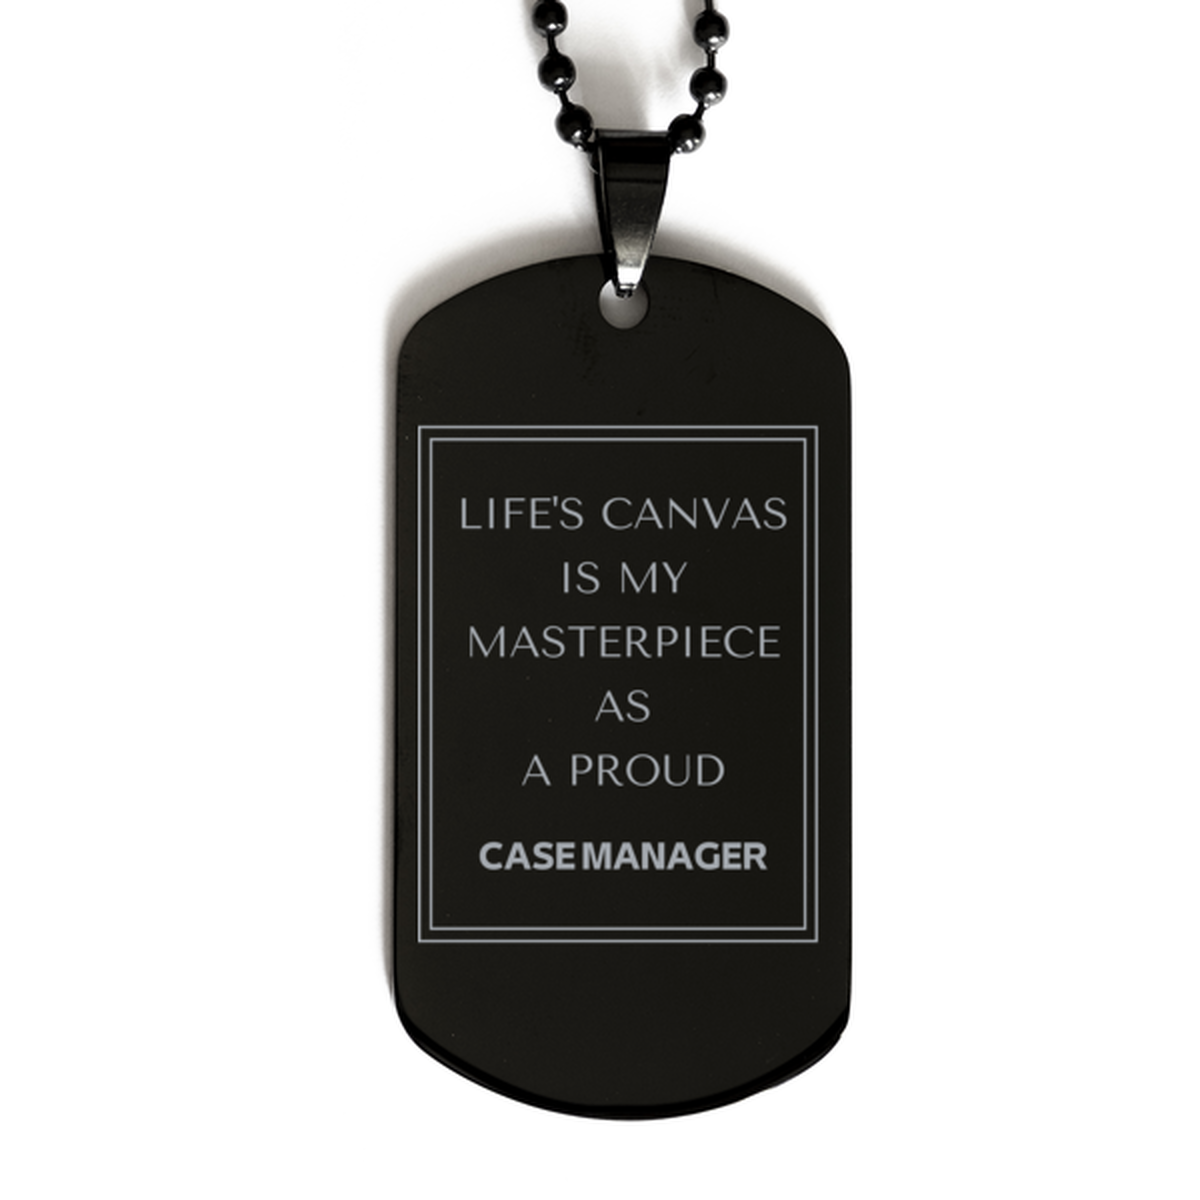 Proud Case Manager Gifts, Life's canvas is my masterpiece, Epic Birthday Christmas Unique Black Dog Tag For Case Manager, Coworkers, Men, Women, Friends